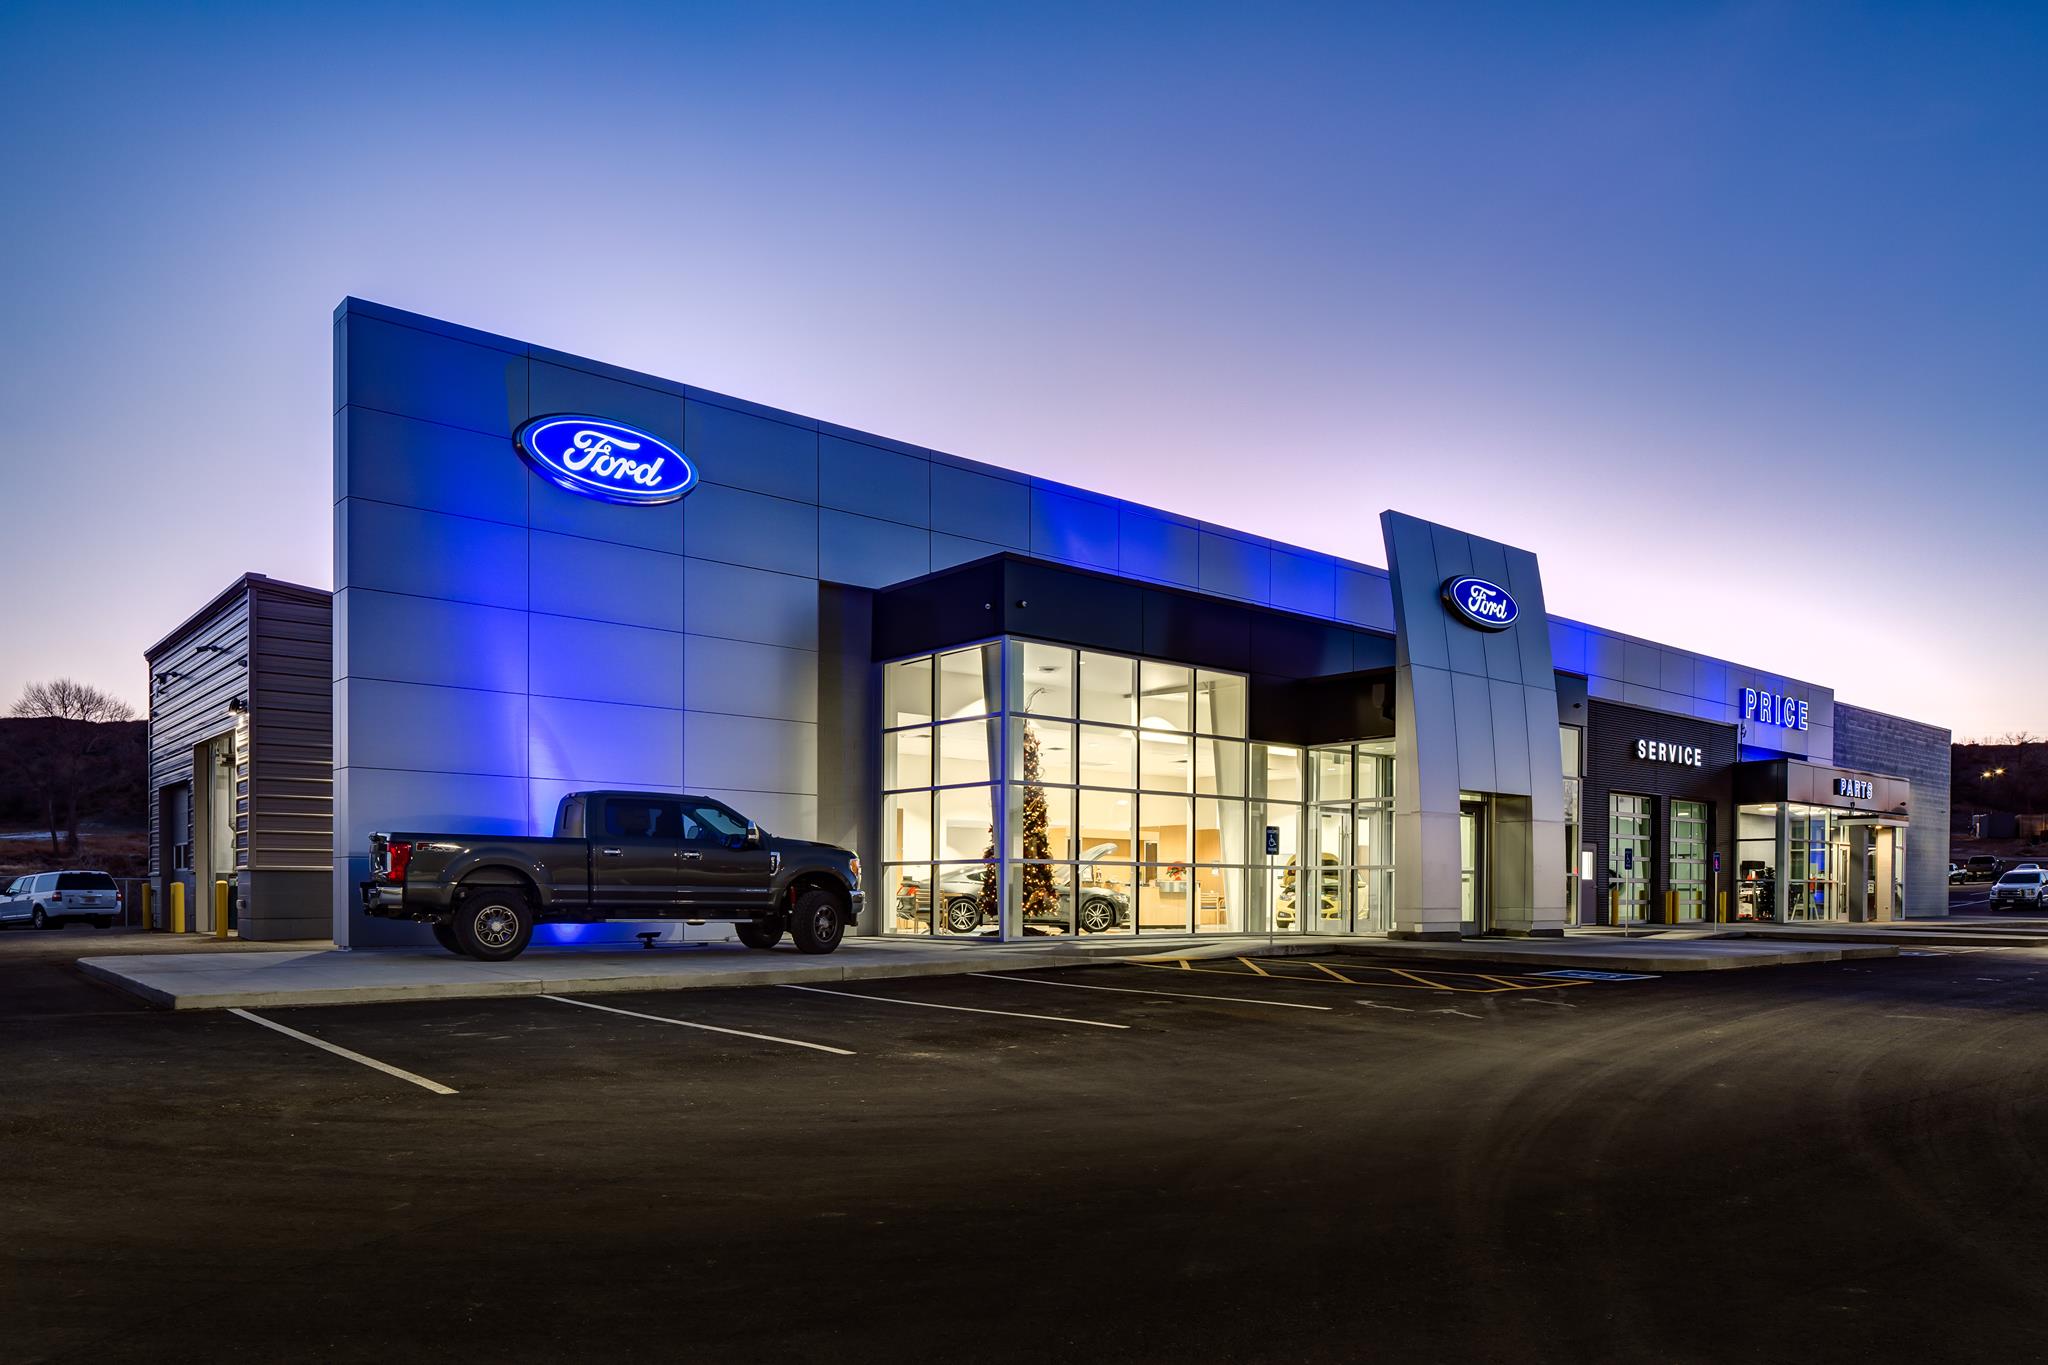 Understanding the dealership marketing activities that are attracting leads  